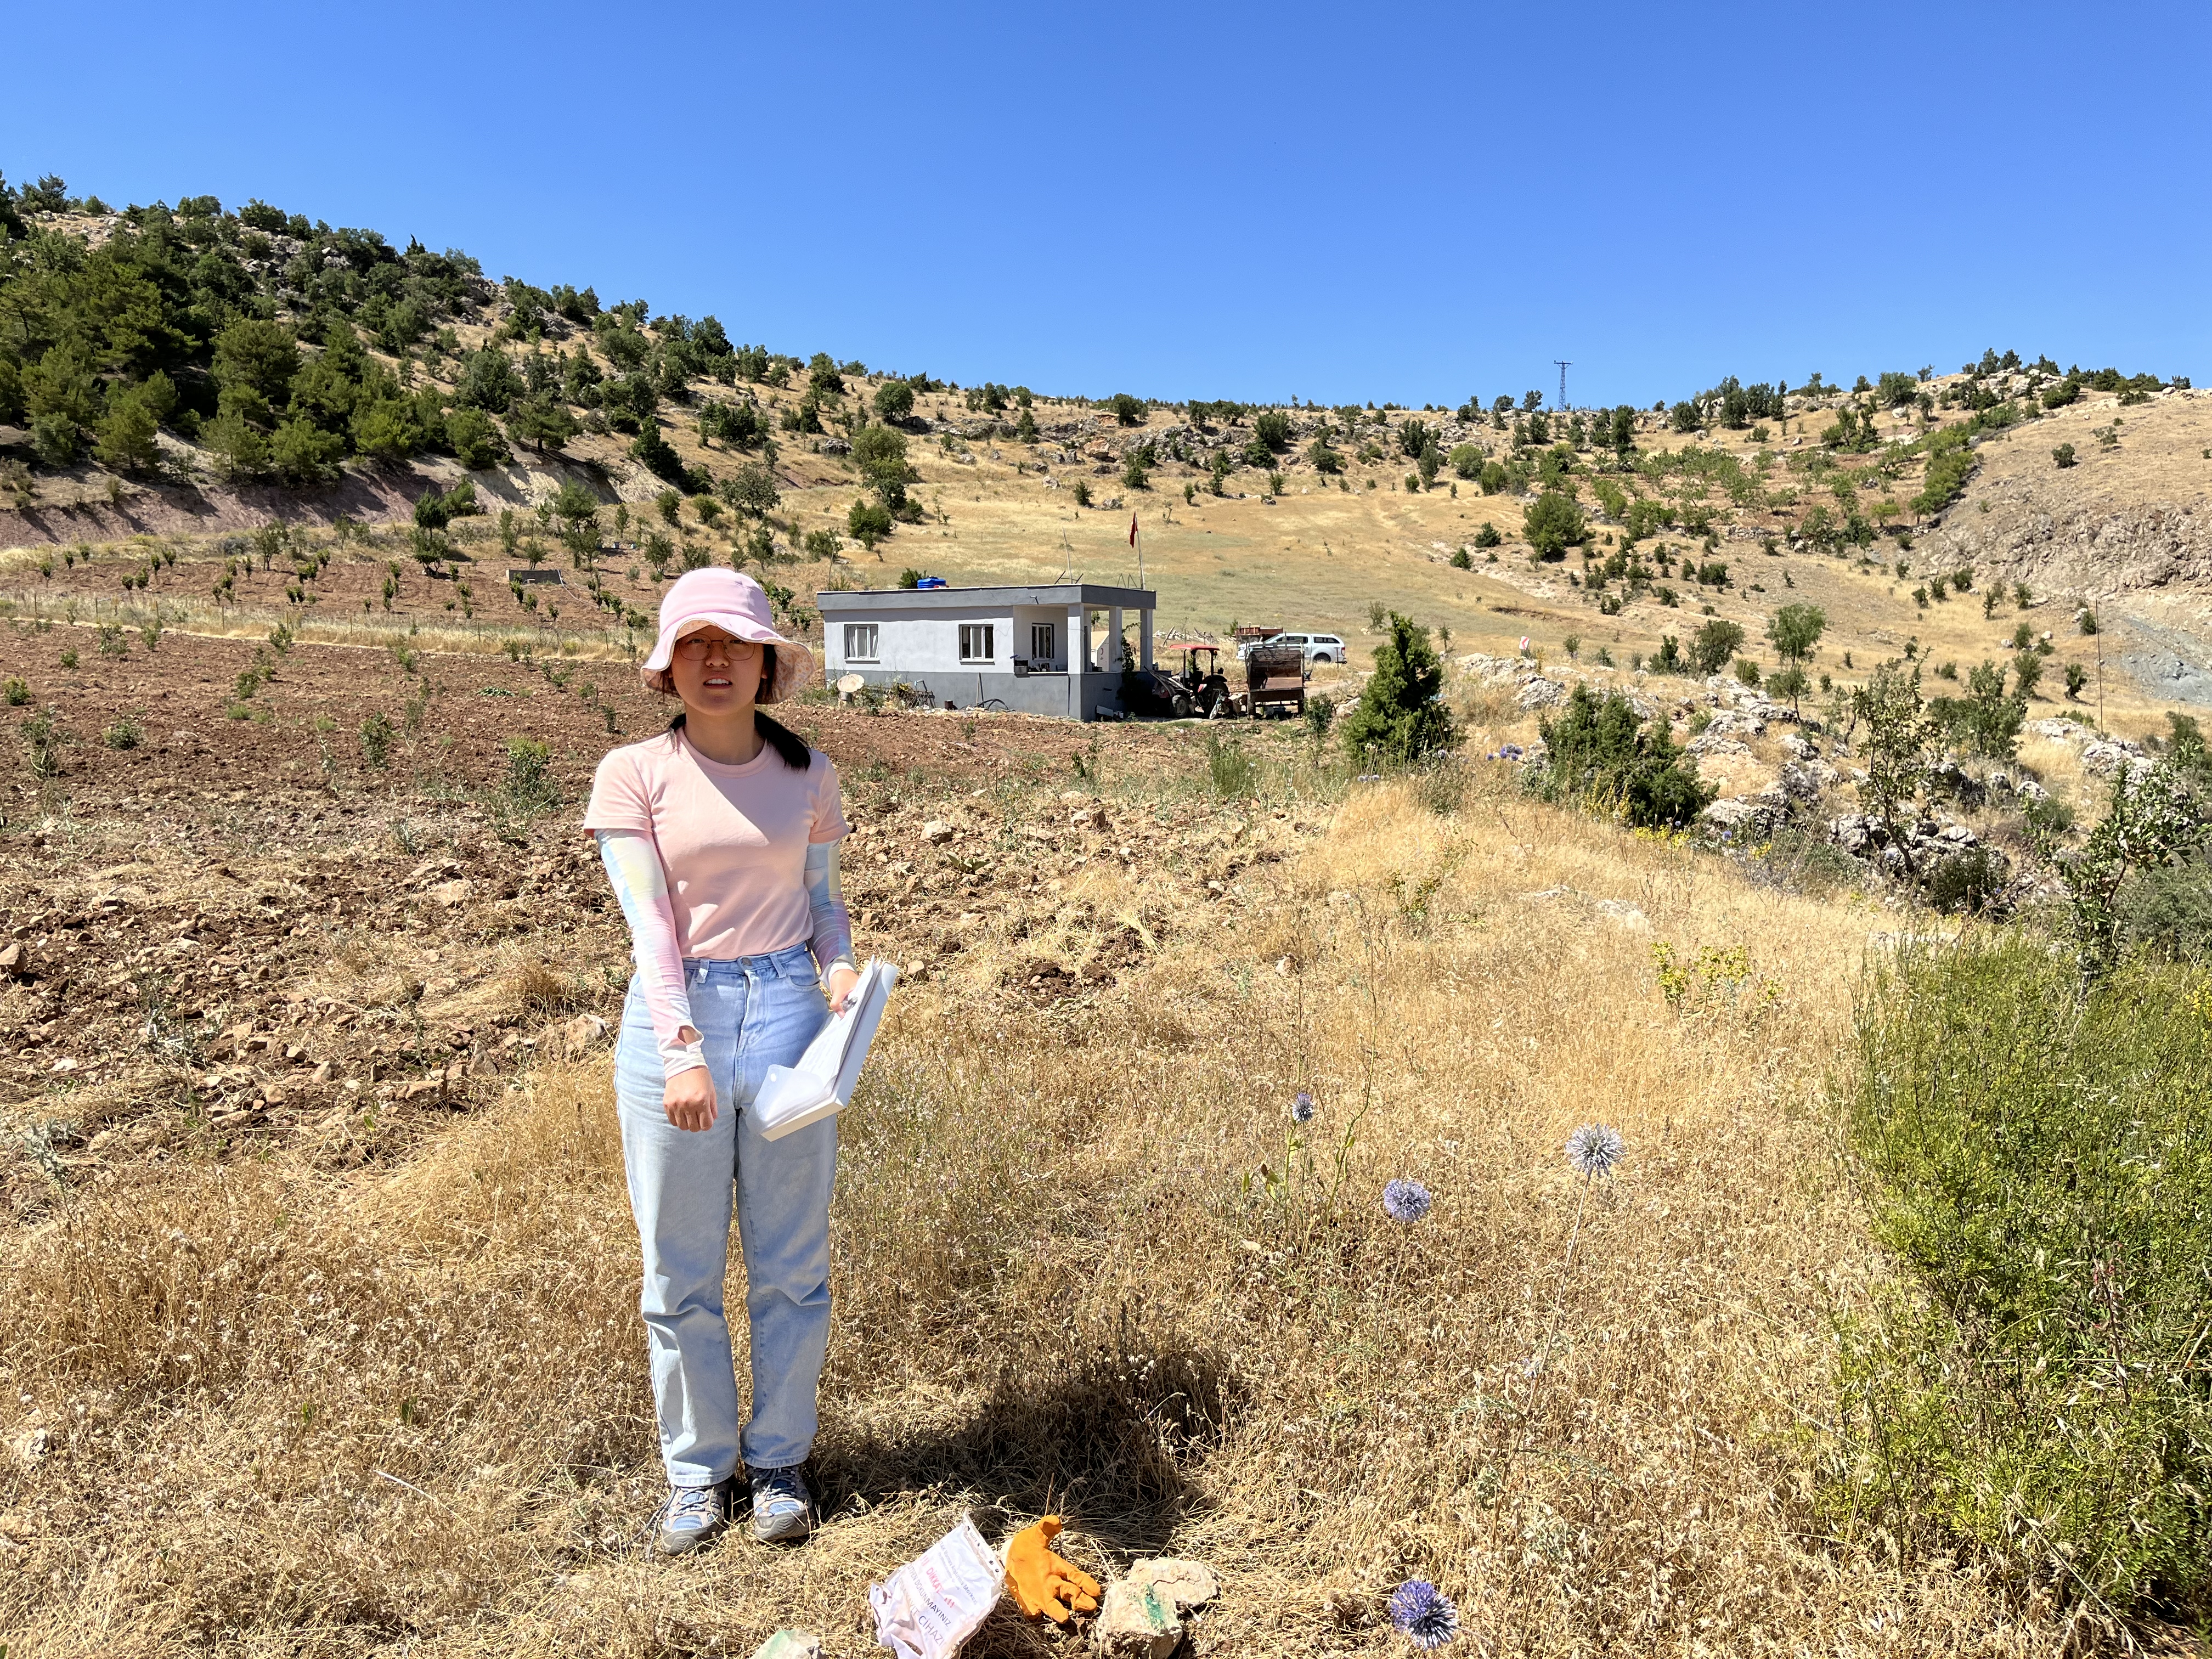 Georgia Tech graduate student Chang Ding pointing at a deployed seismic node in Southern Turkey